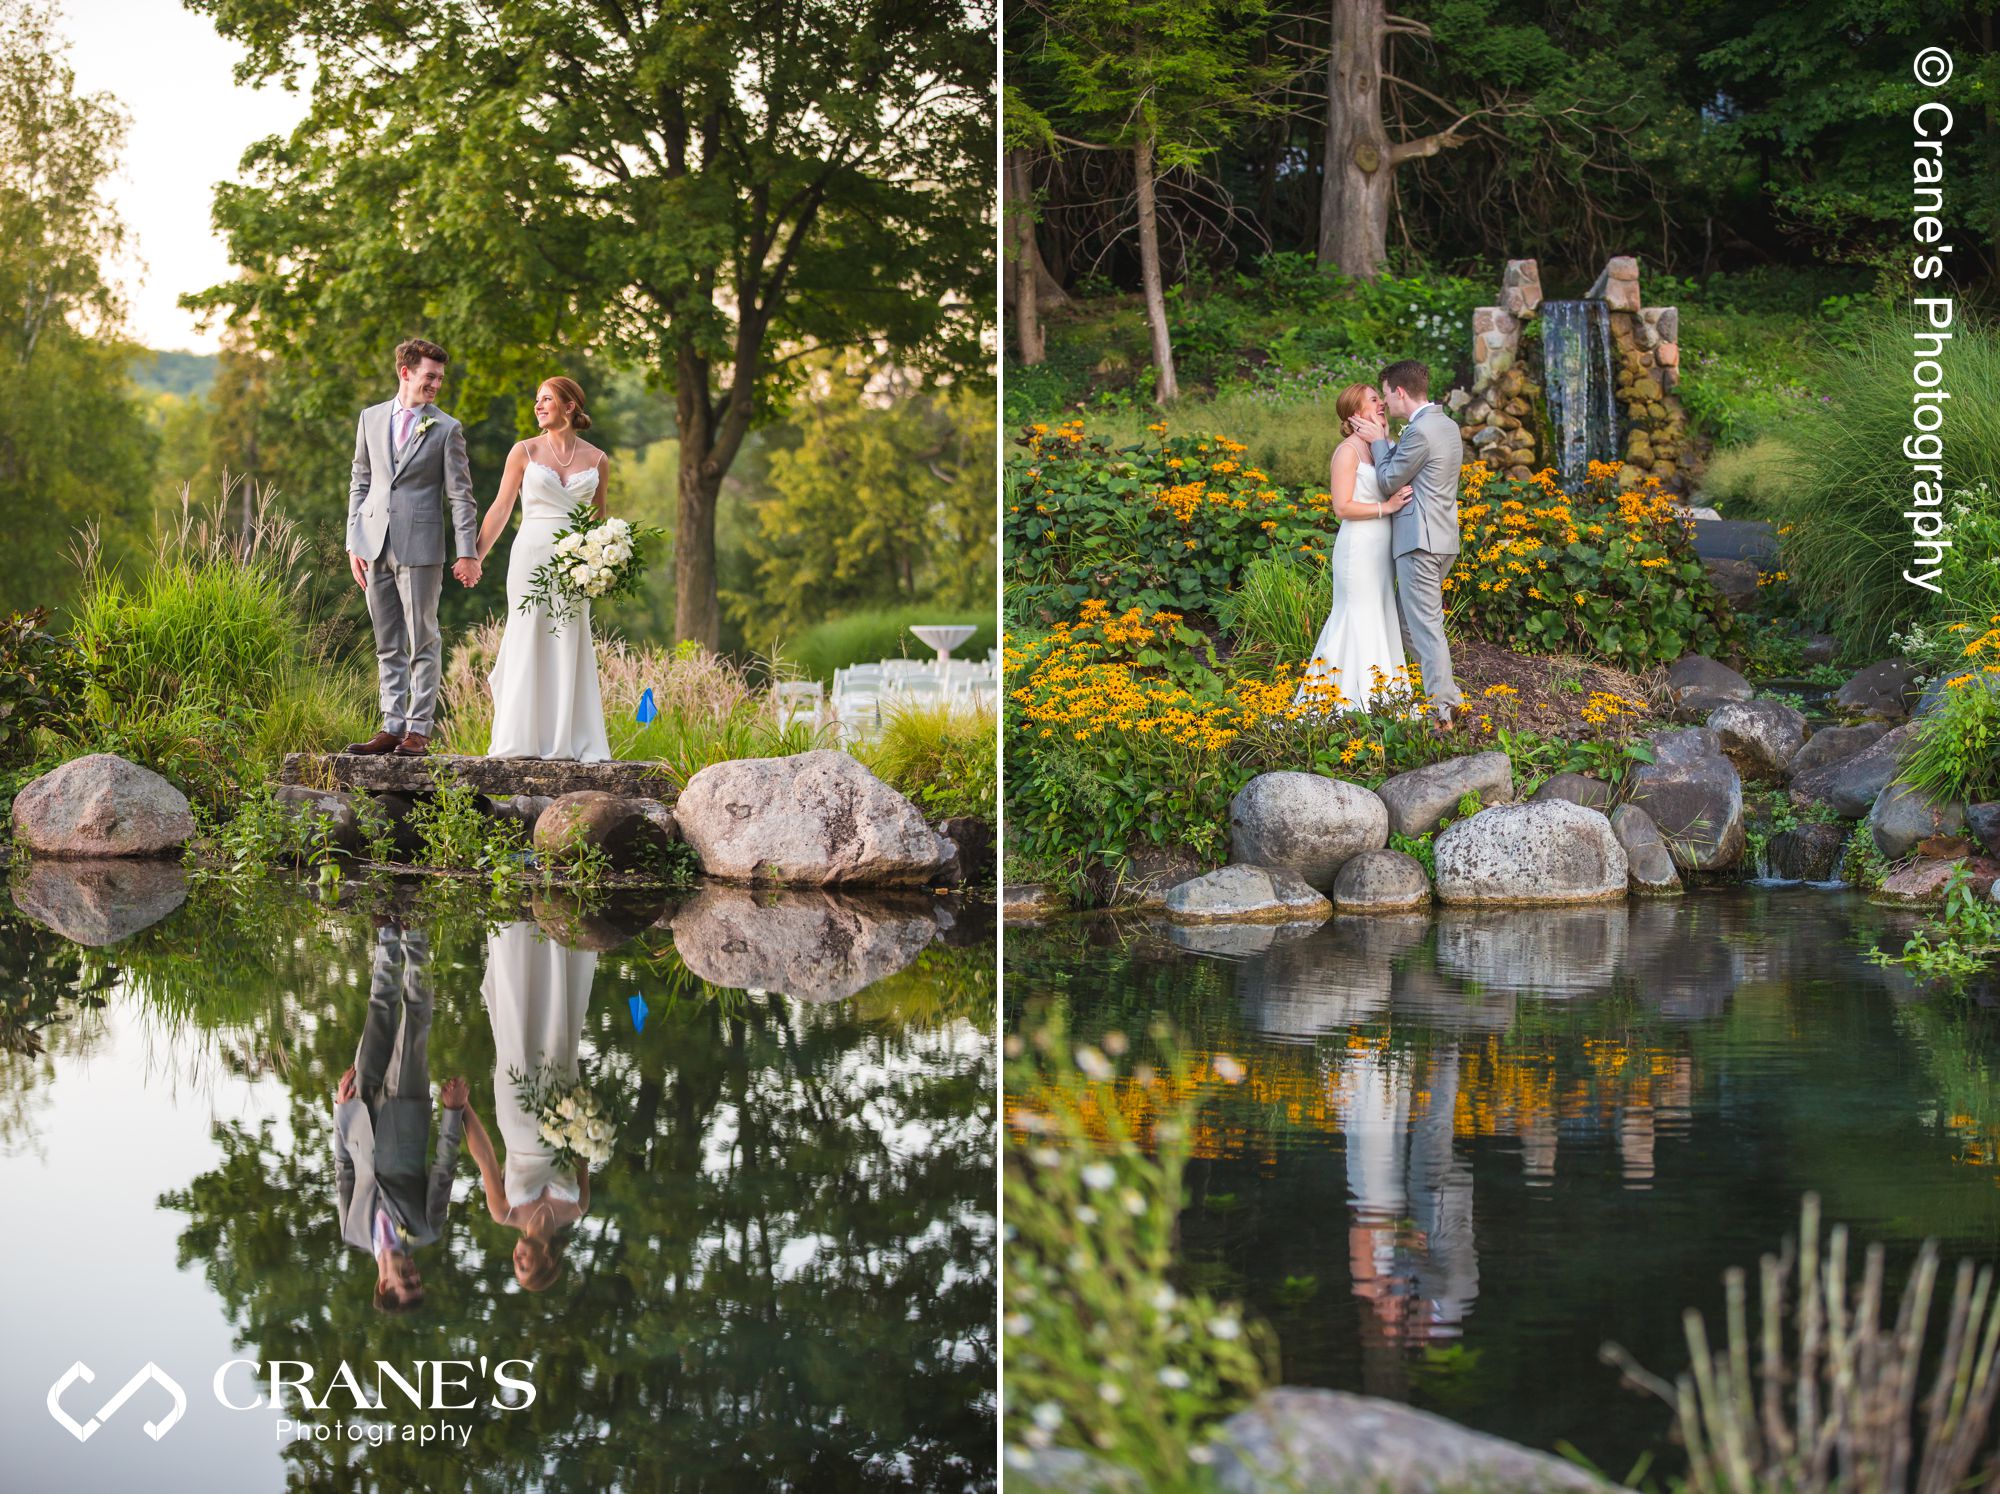 Wedding images with reflection over the ponds at Big Foot Country Club